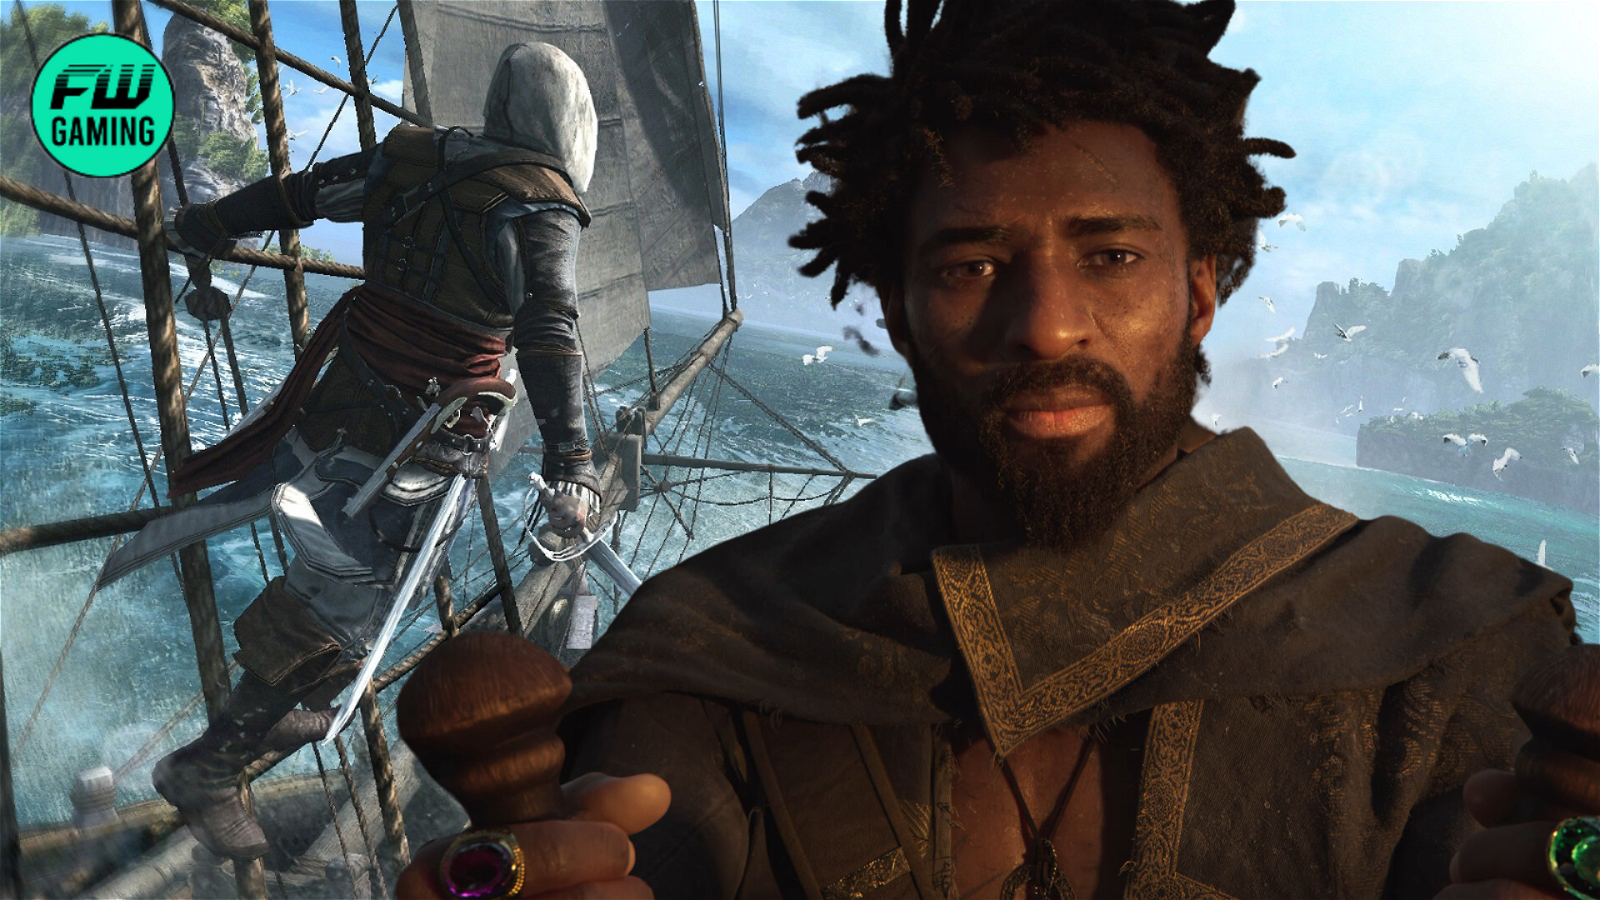 "It's not even AAAA!": Fans Are Turning to a 'much better pirate game' Than Skull and Bones, and Even Ubisoft Wouldn't Dare Argue With the Choice